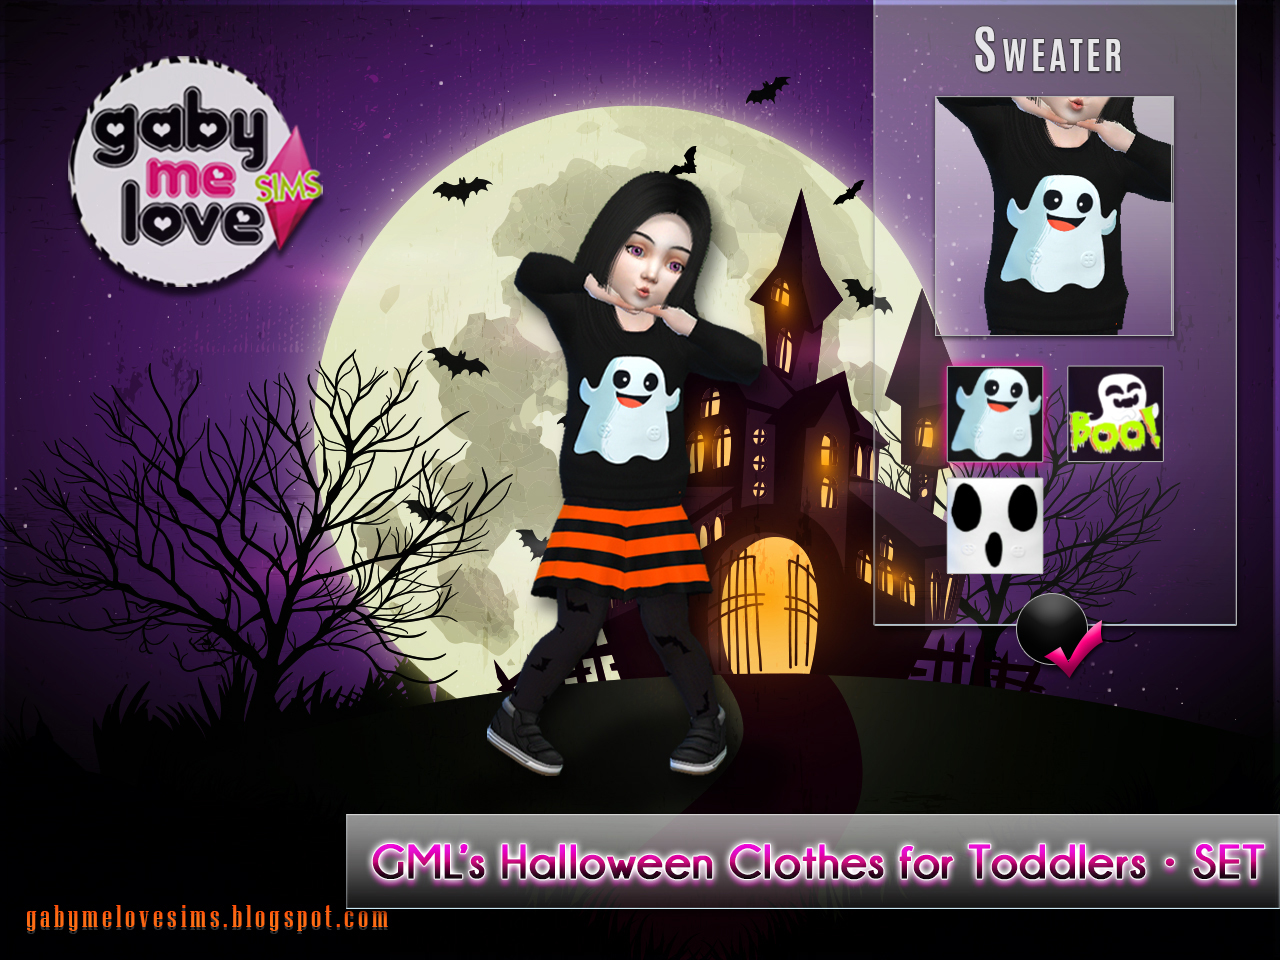 [Gabymelove Sims] GML’s Halloween Clothes for Toddlers • SET (3)